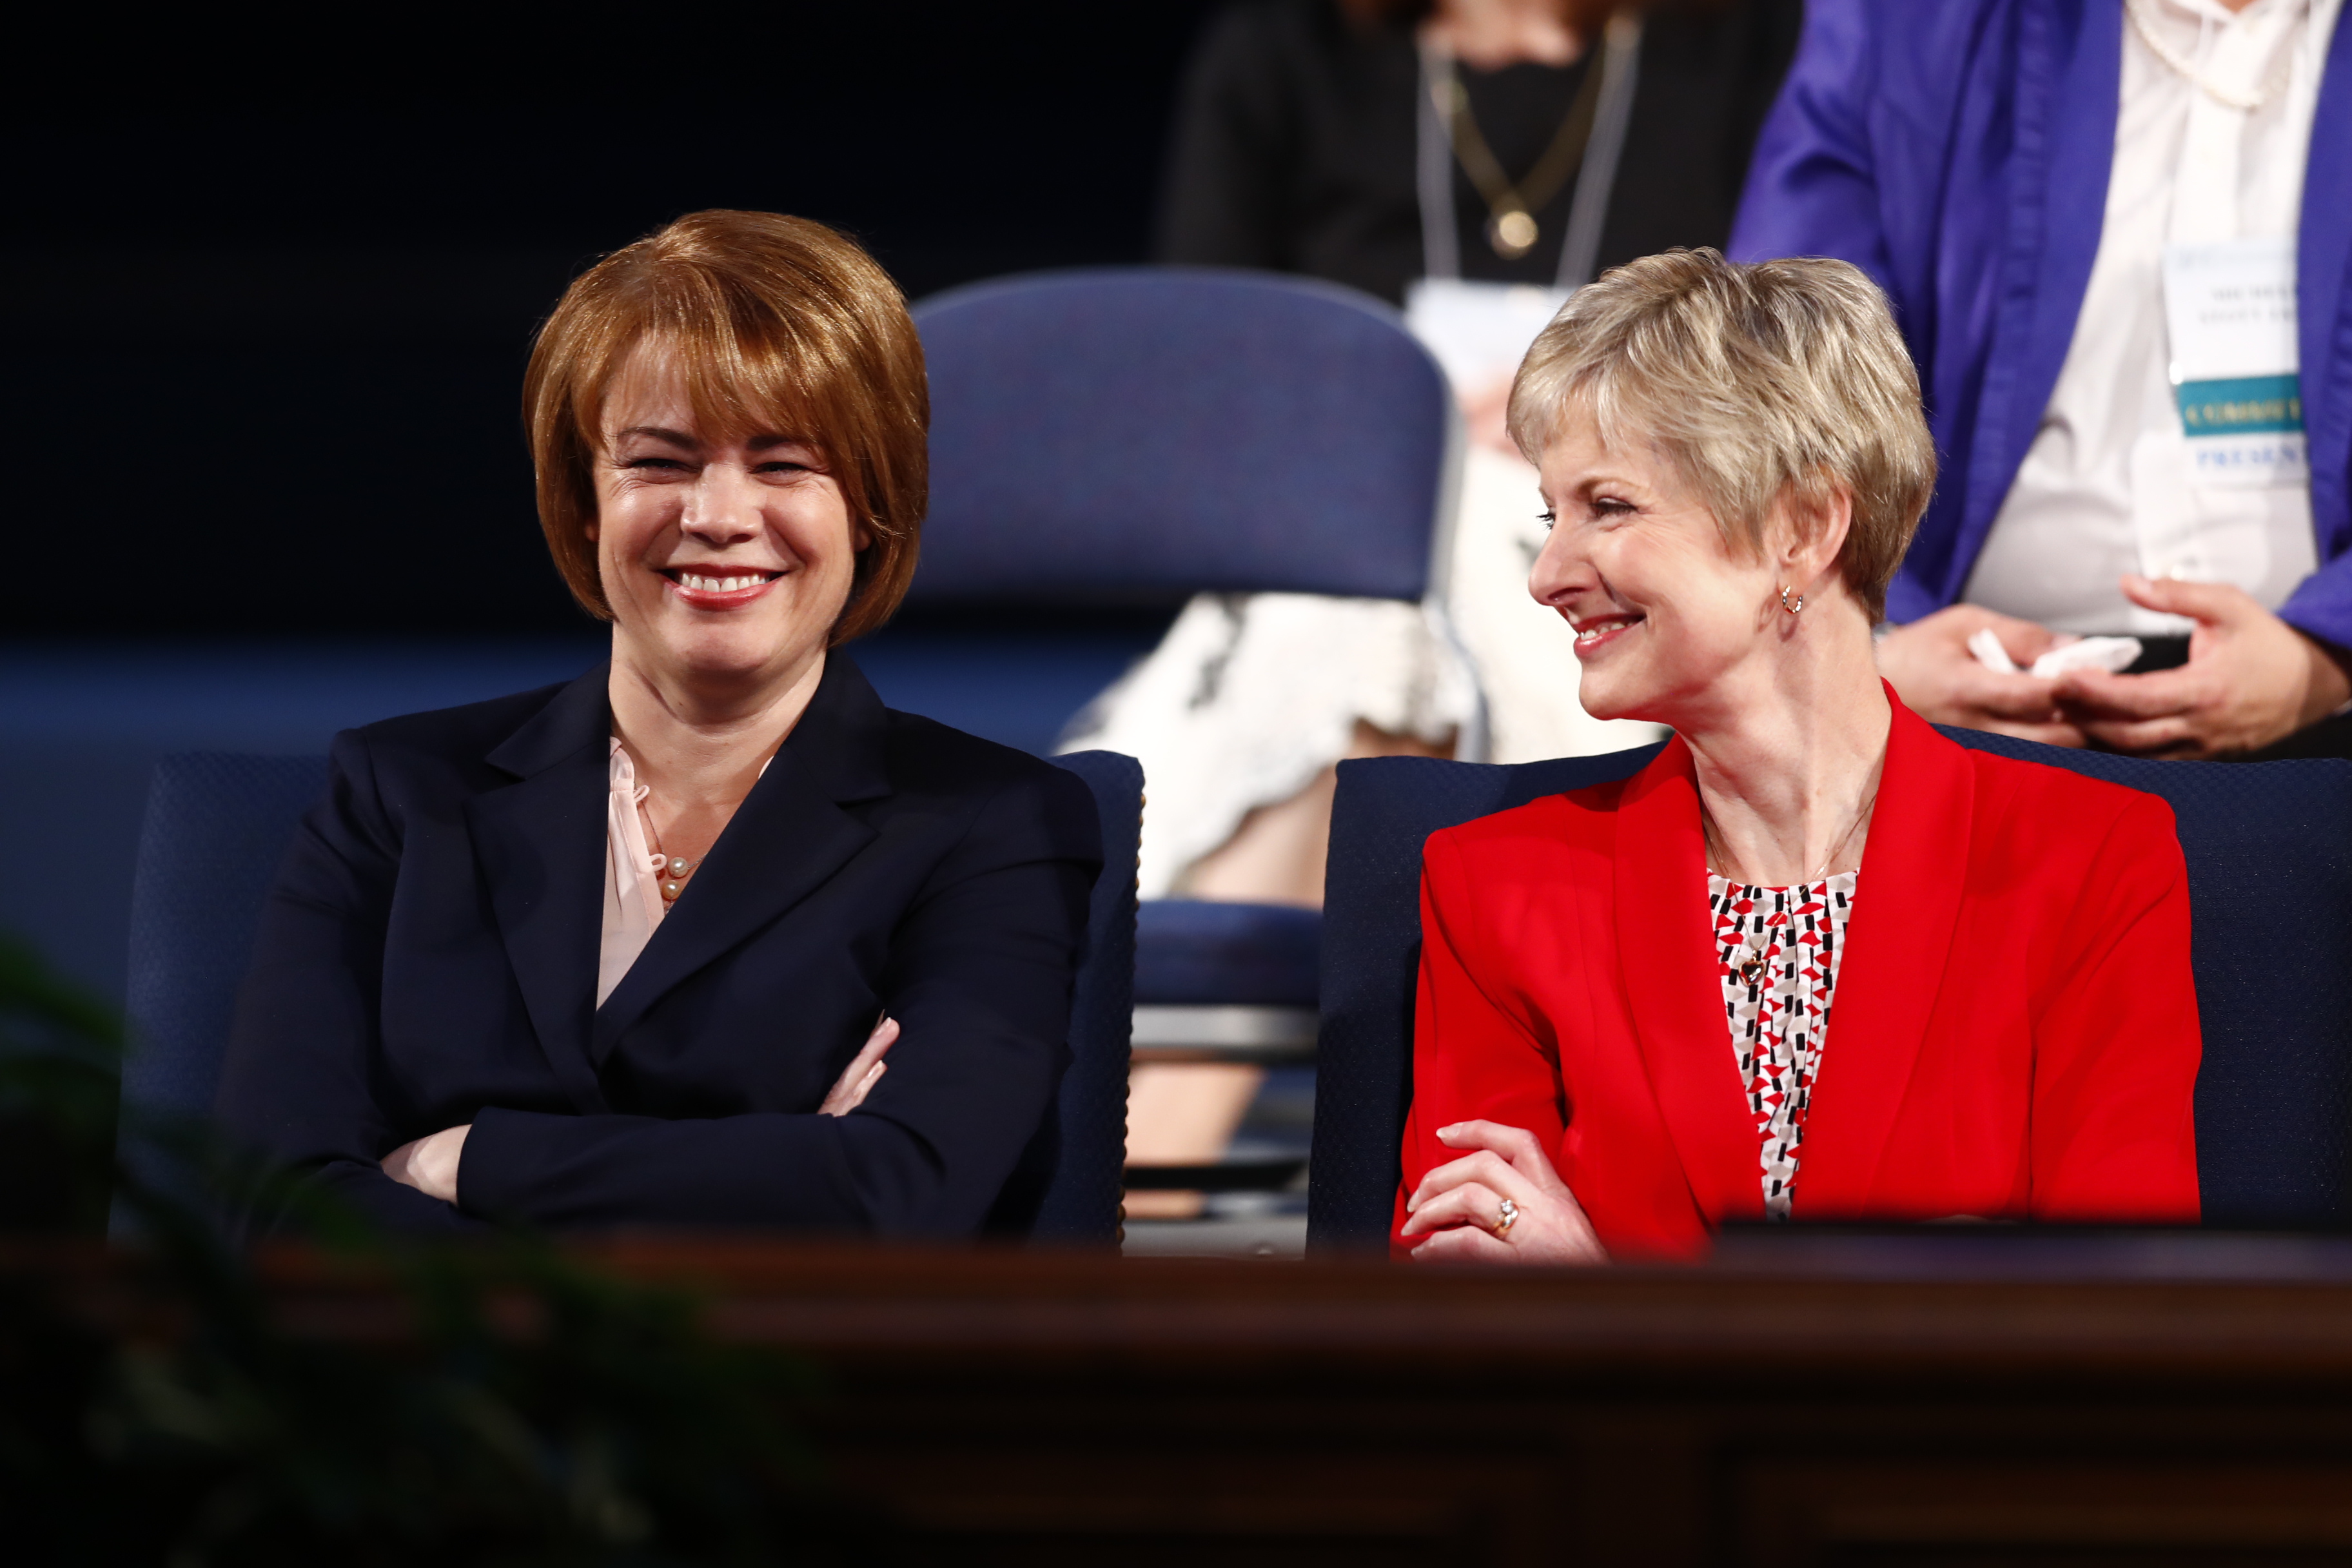 Relief Society General Presidency Shares Insights at BYU Women’s Conference